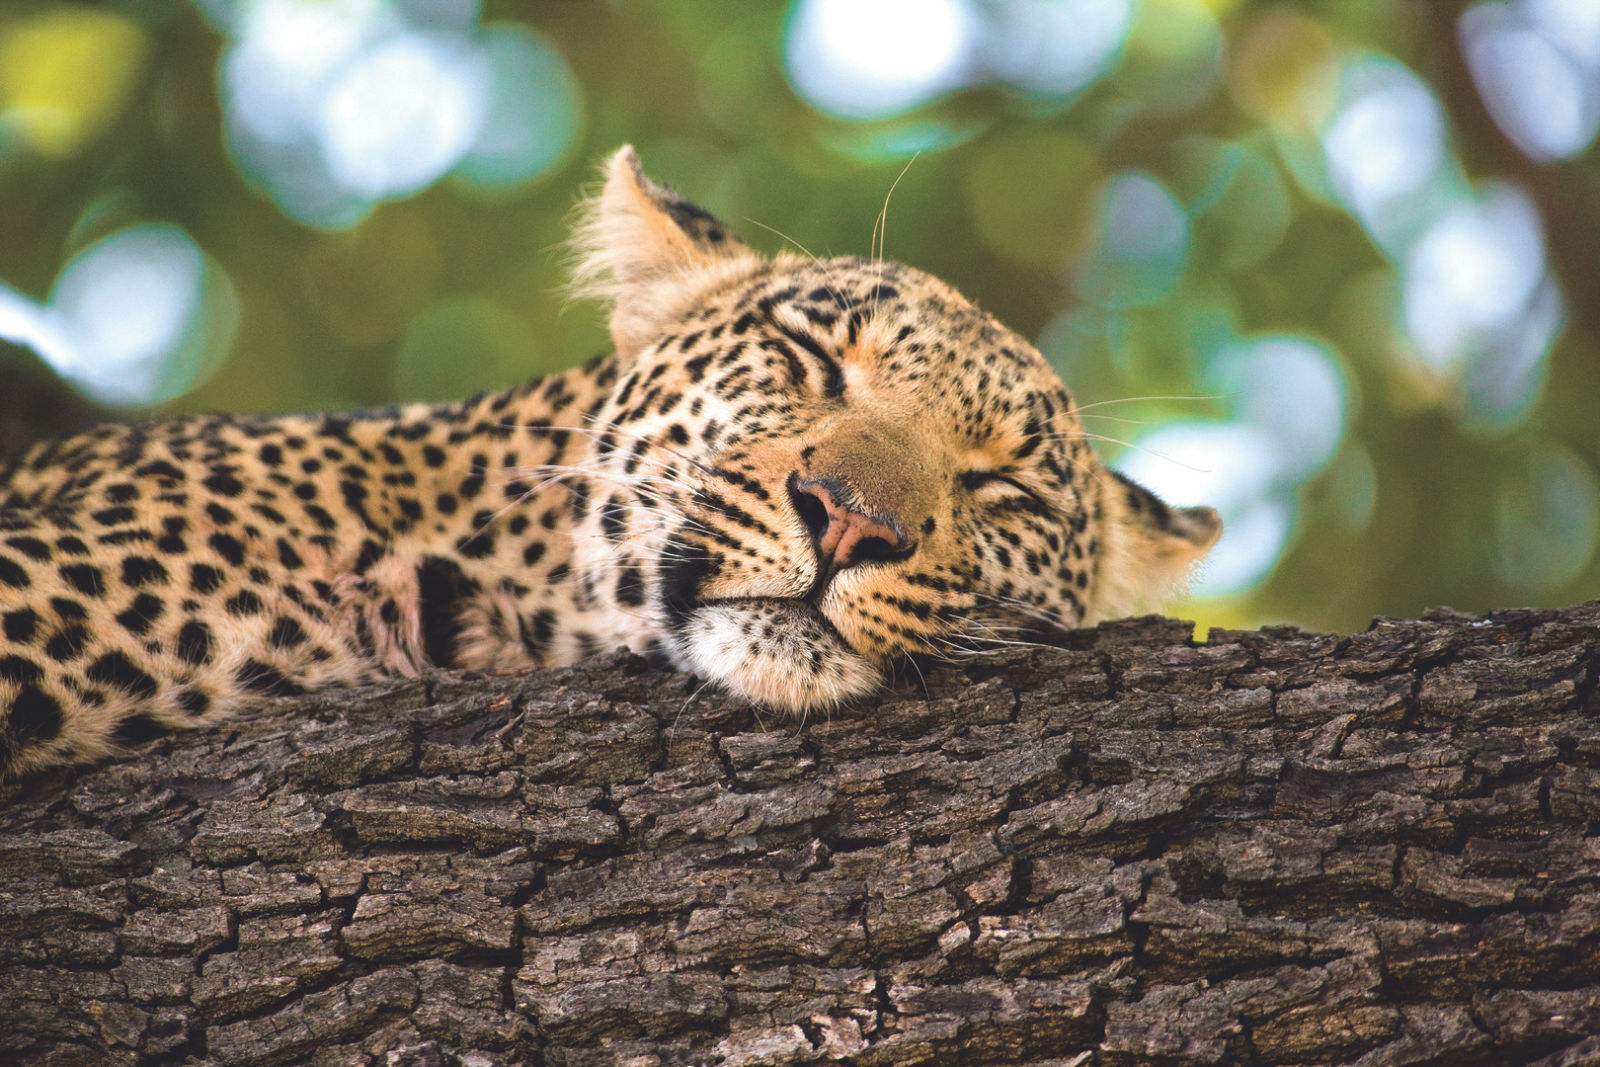 Leopard, wildlife, Botswana, nature and species conservation
